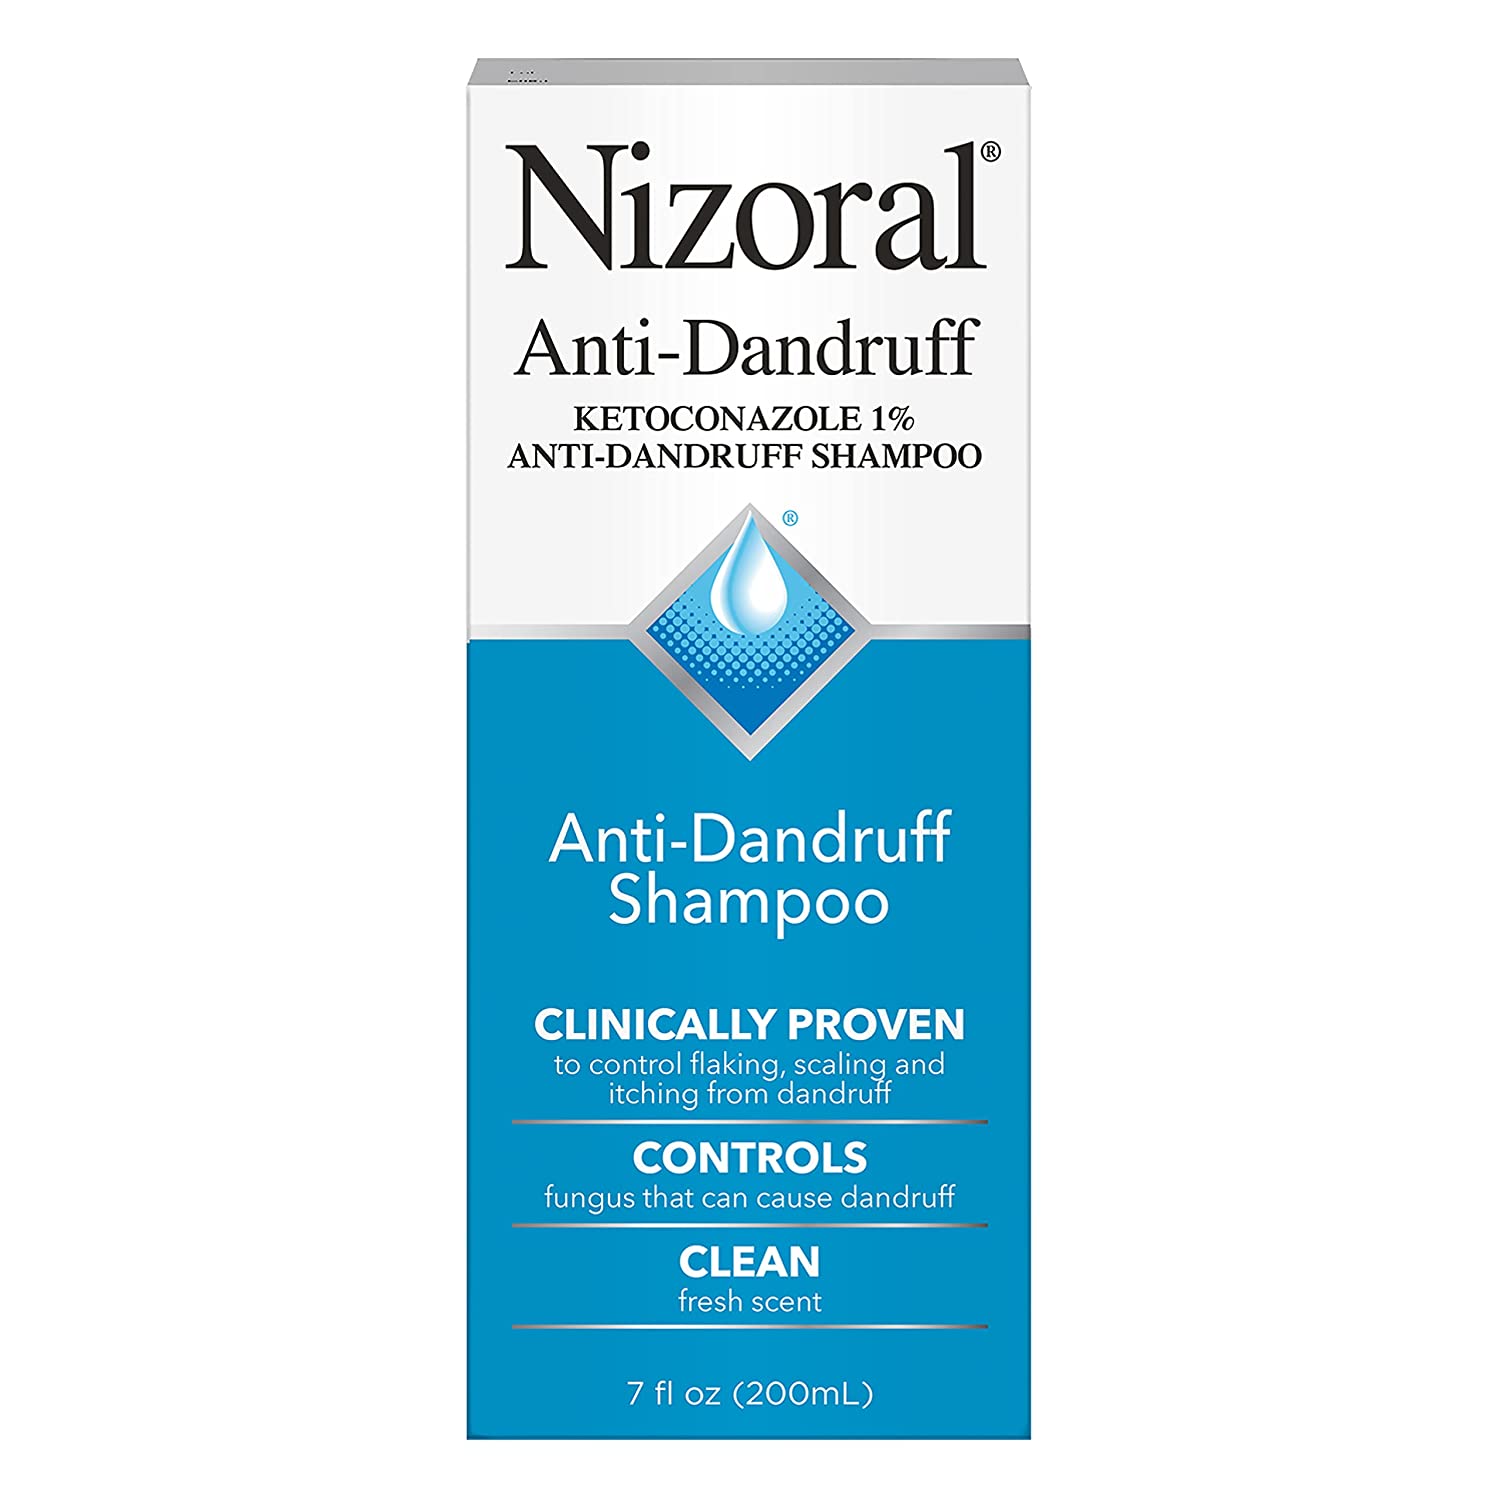  3. Nizoral Anti-Dandruff Shampoo is the best for itching. 